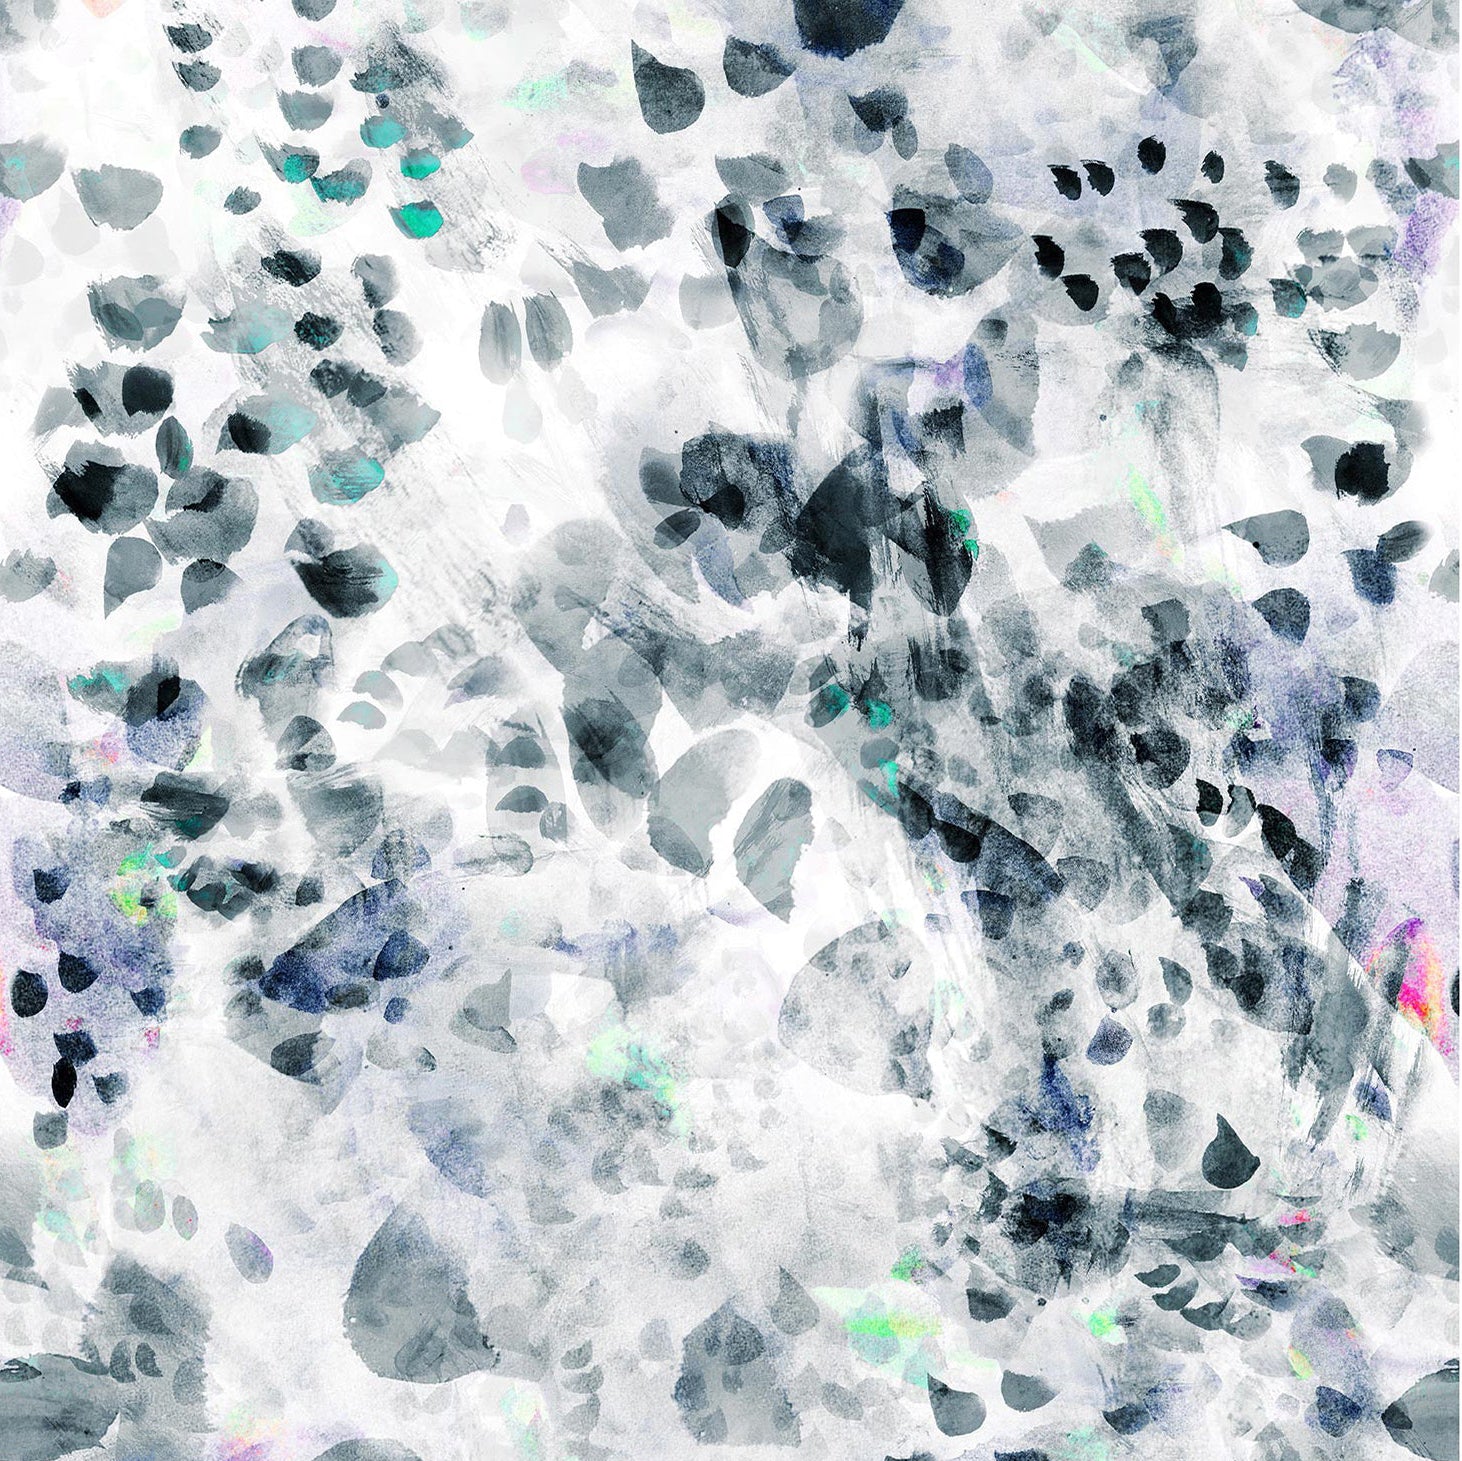 Detail of wallpaper in an abstract paint blotch print in black, gray, blue and green on a white field.